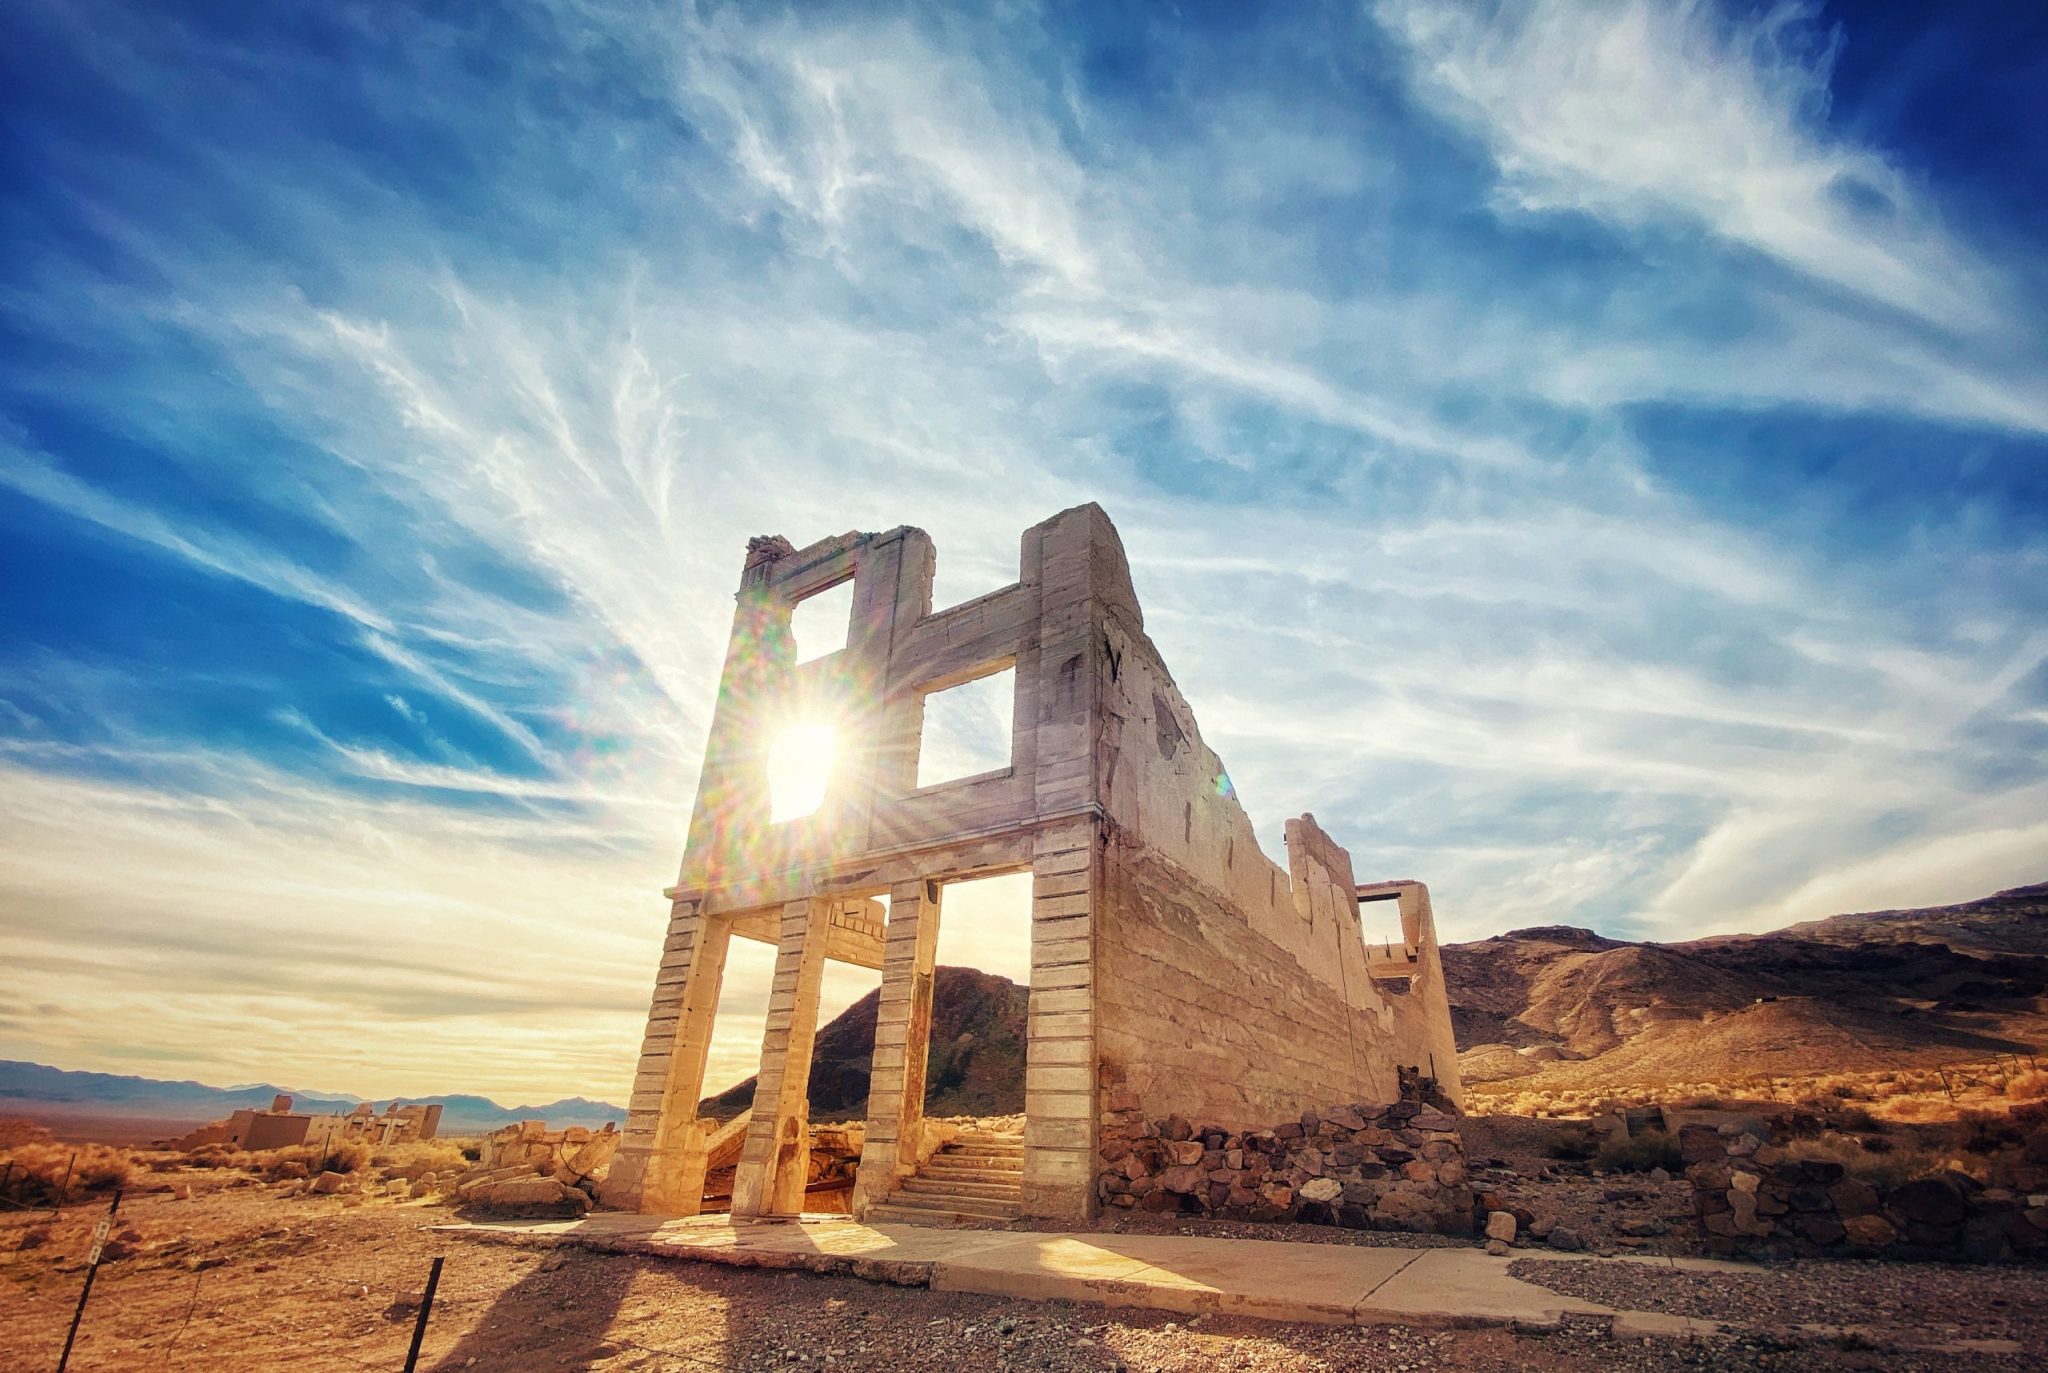 Abandoned building in Rhyolite Ghost Town